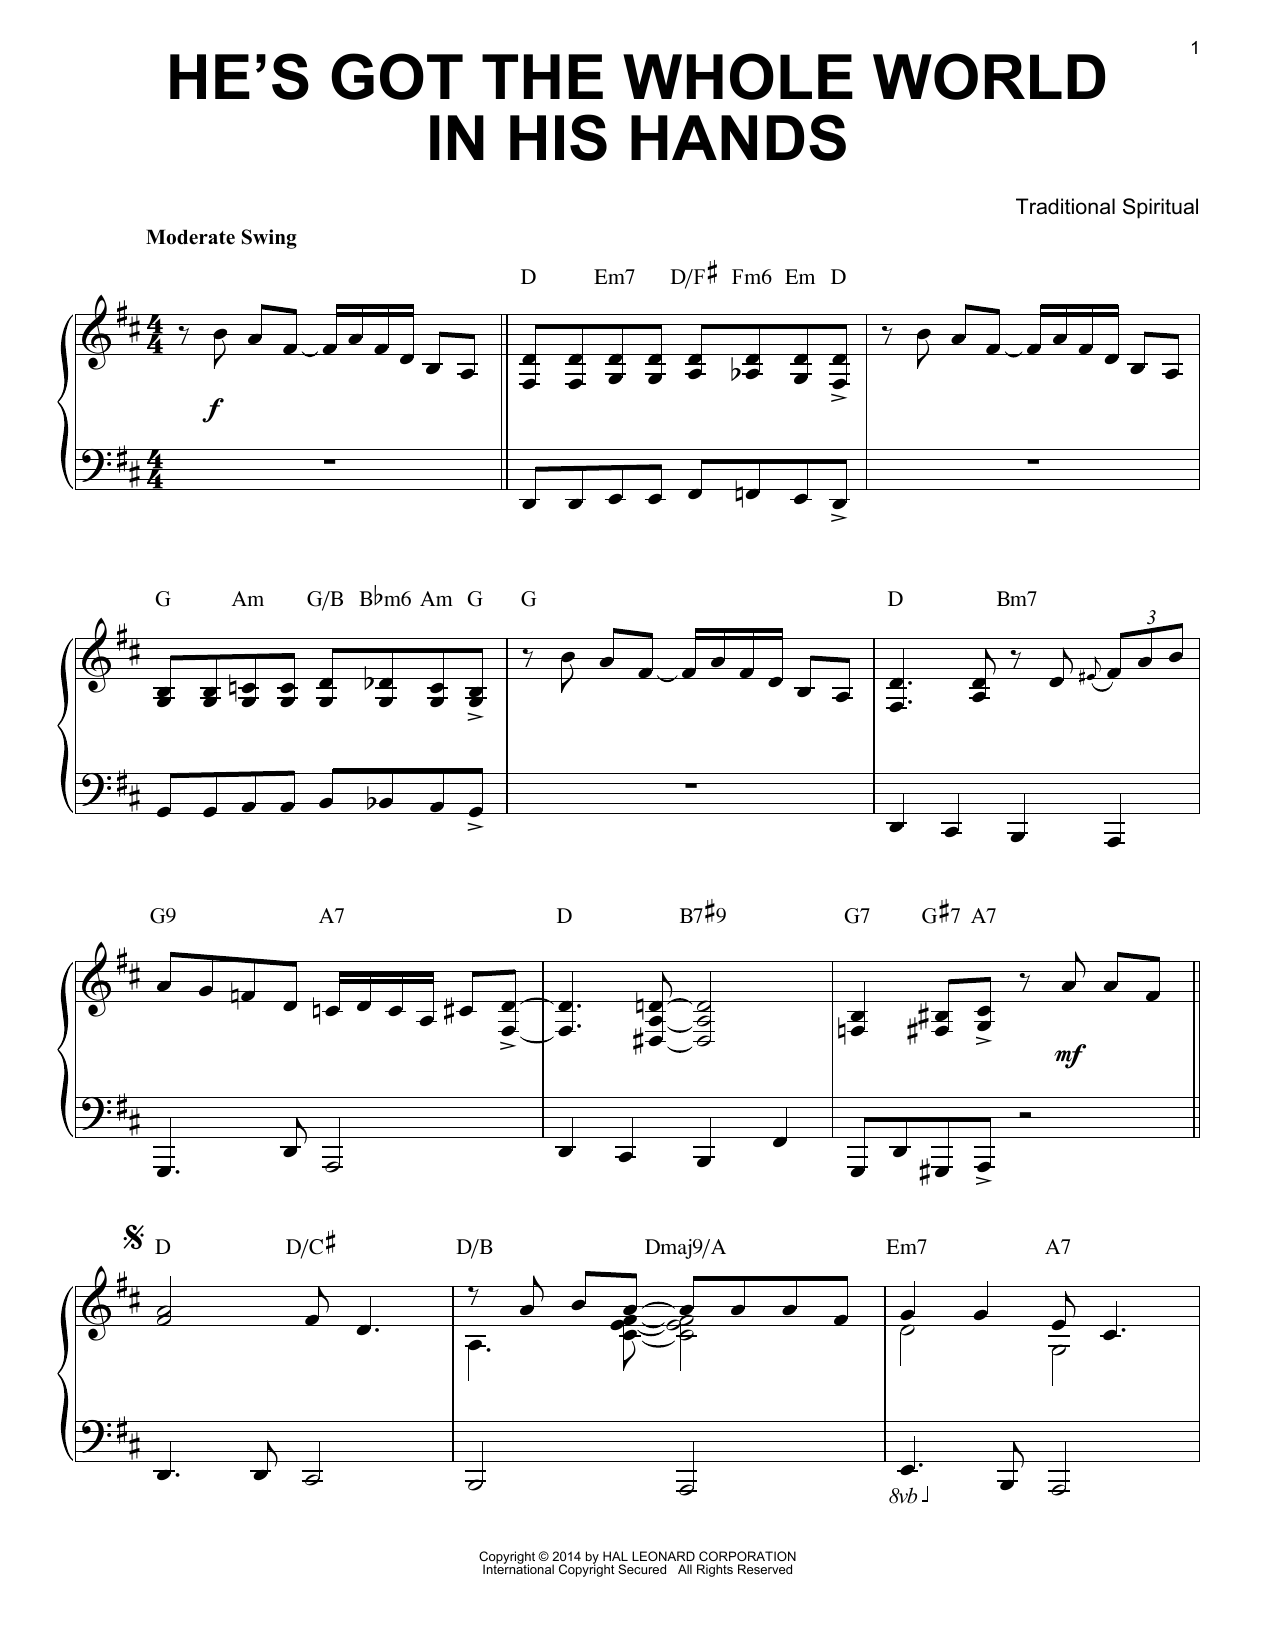 Download Traditional Spiritual He's Got The Whole World In His Hands [ Sheet Music